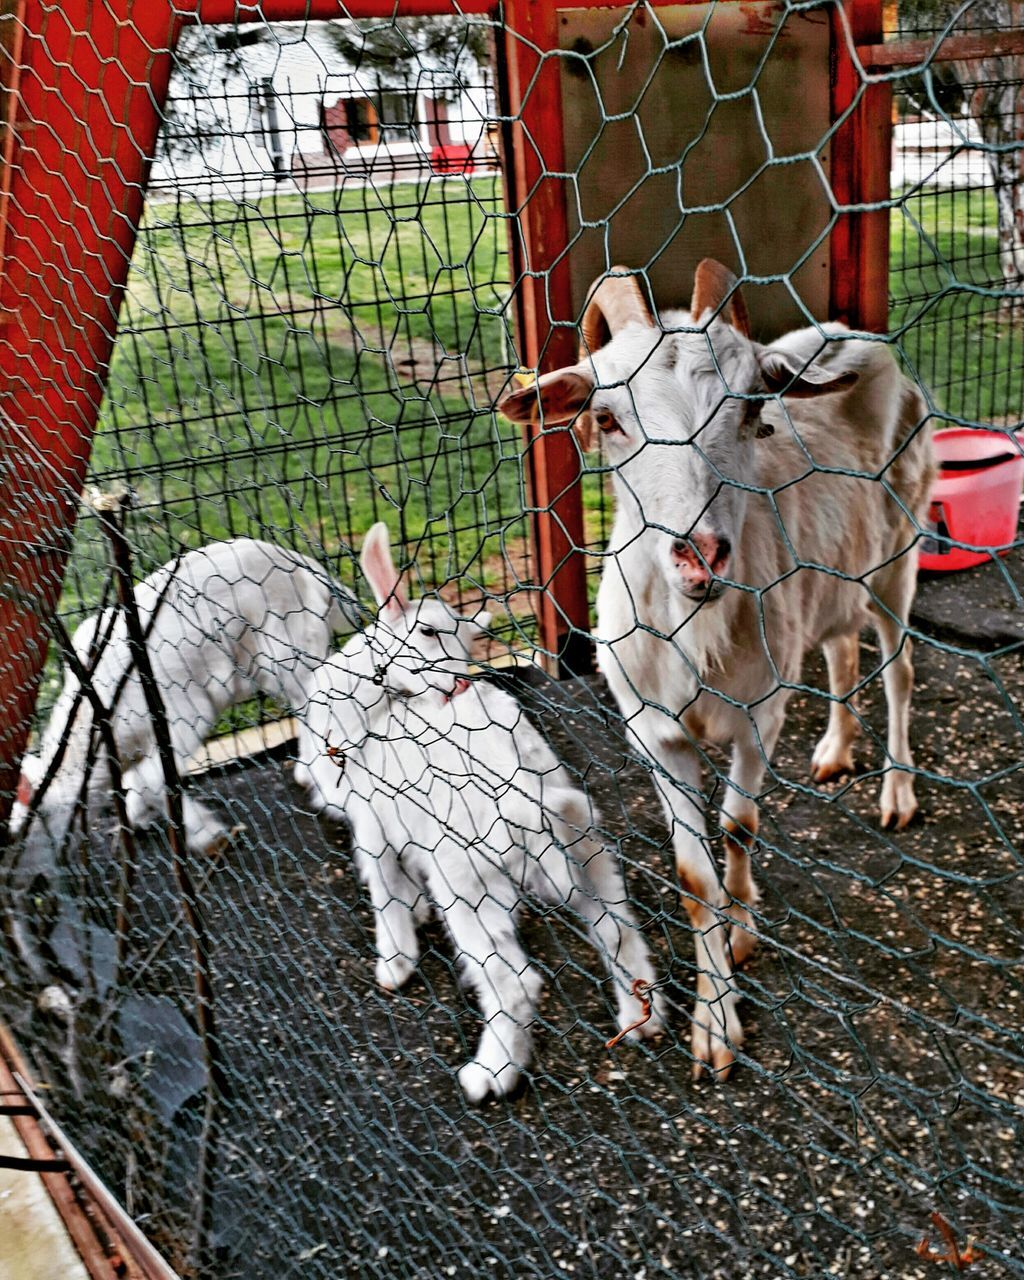 domestic animals, fence, animal themes, mammal, livestock, no people, young animal, outdoors, day, pets, cage